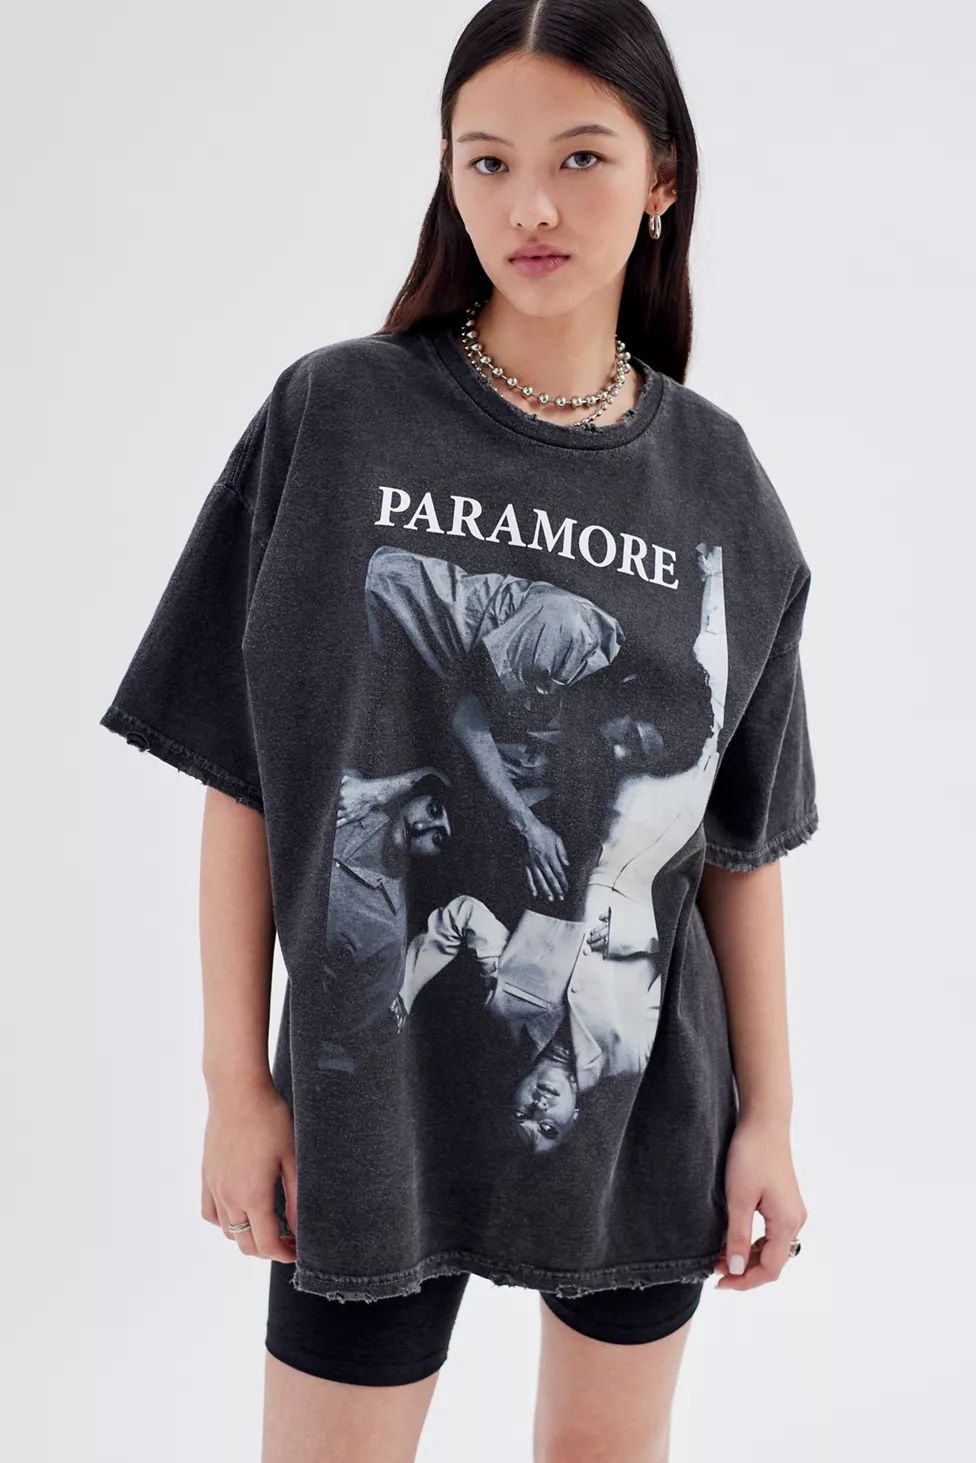 Paramore T-Shirt Dress | Urban Outfitters (US and RoW)